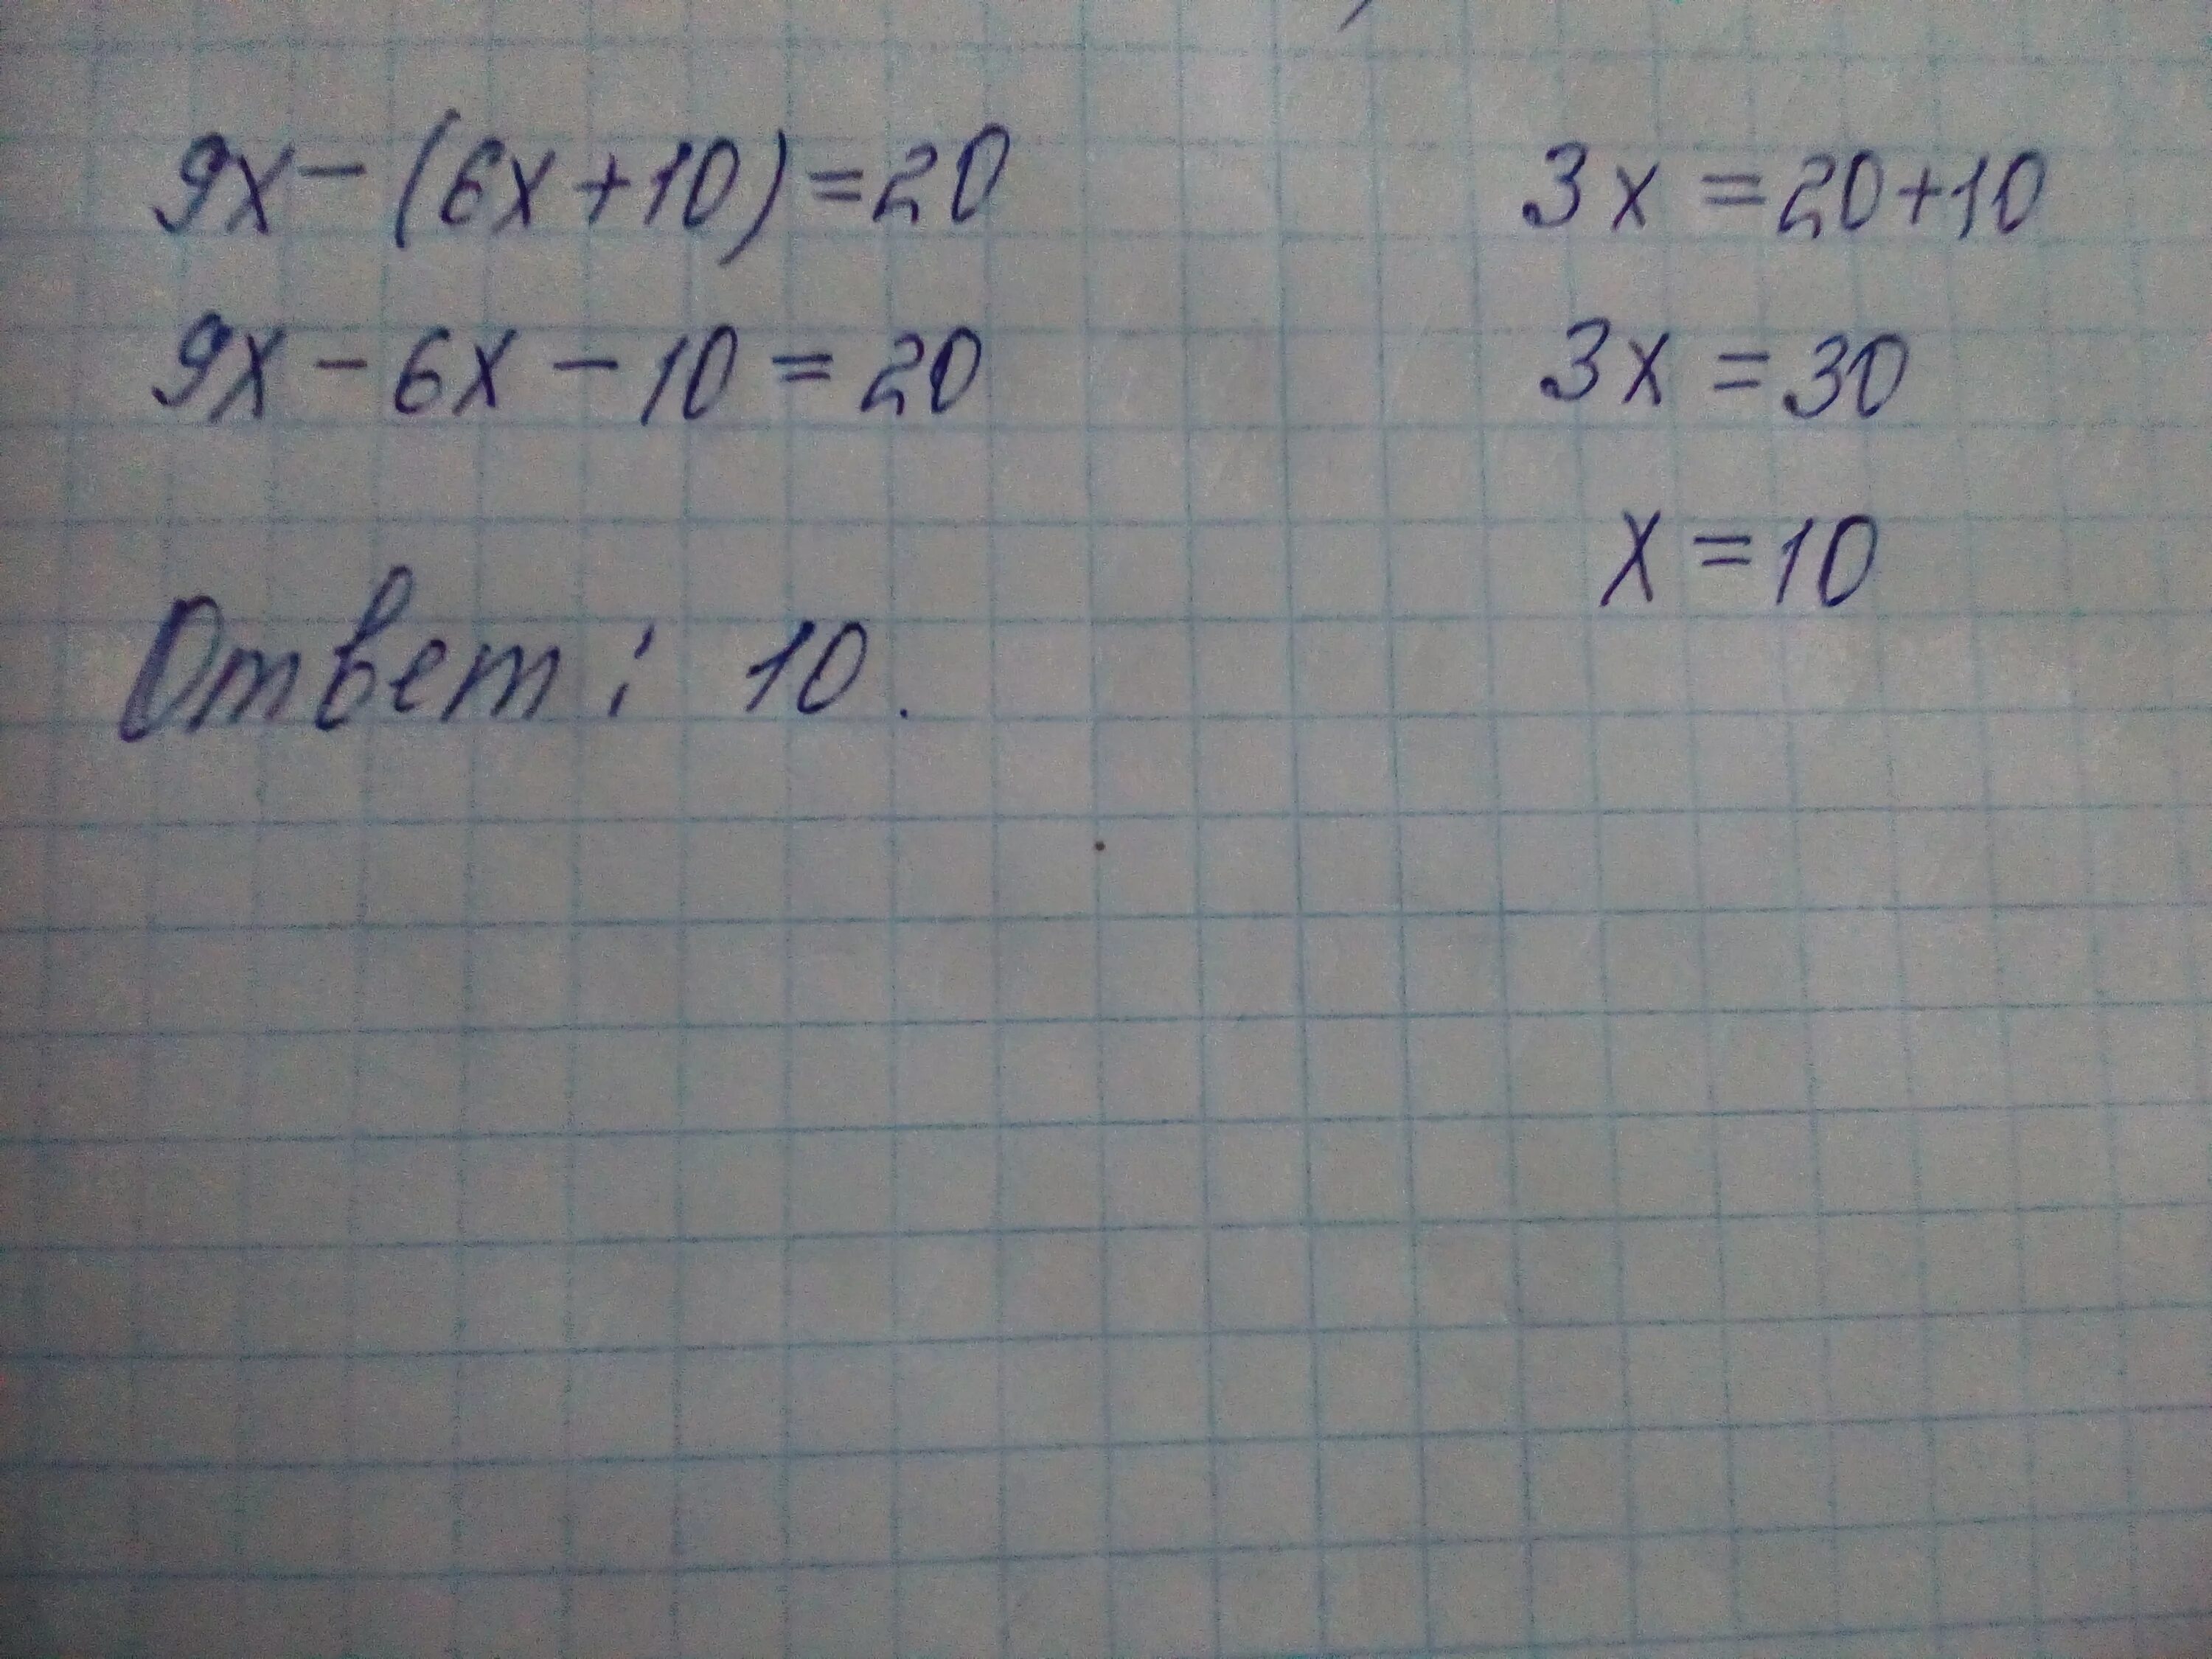 15 x 10 6 x 8. 20x10. X+6>10. 6x-10=0. (X<= -6) or (x>10).